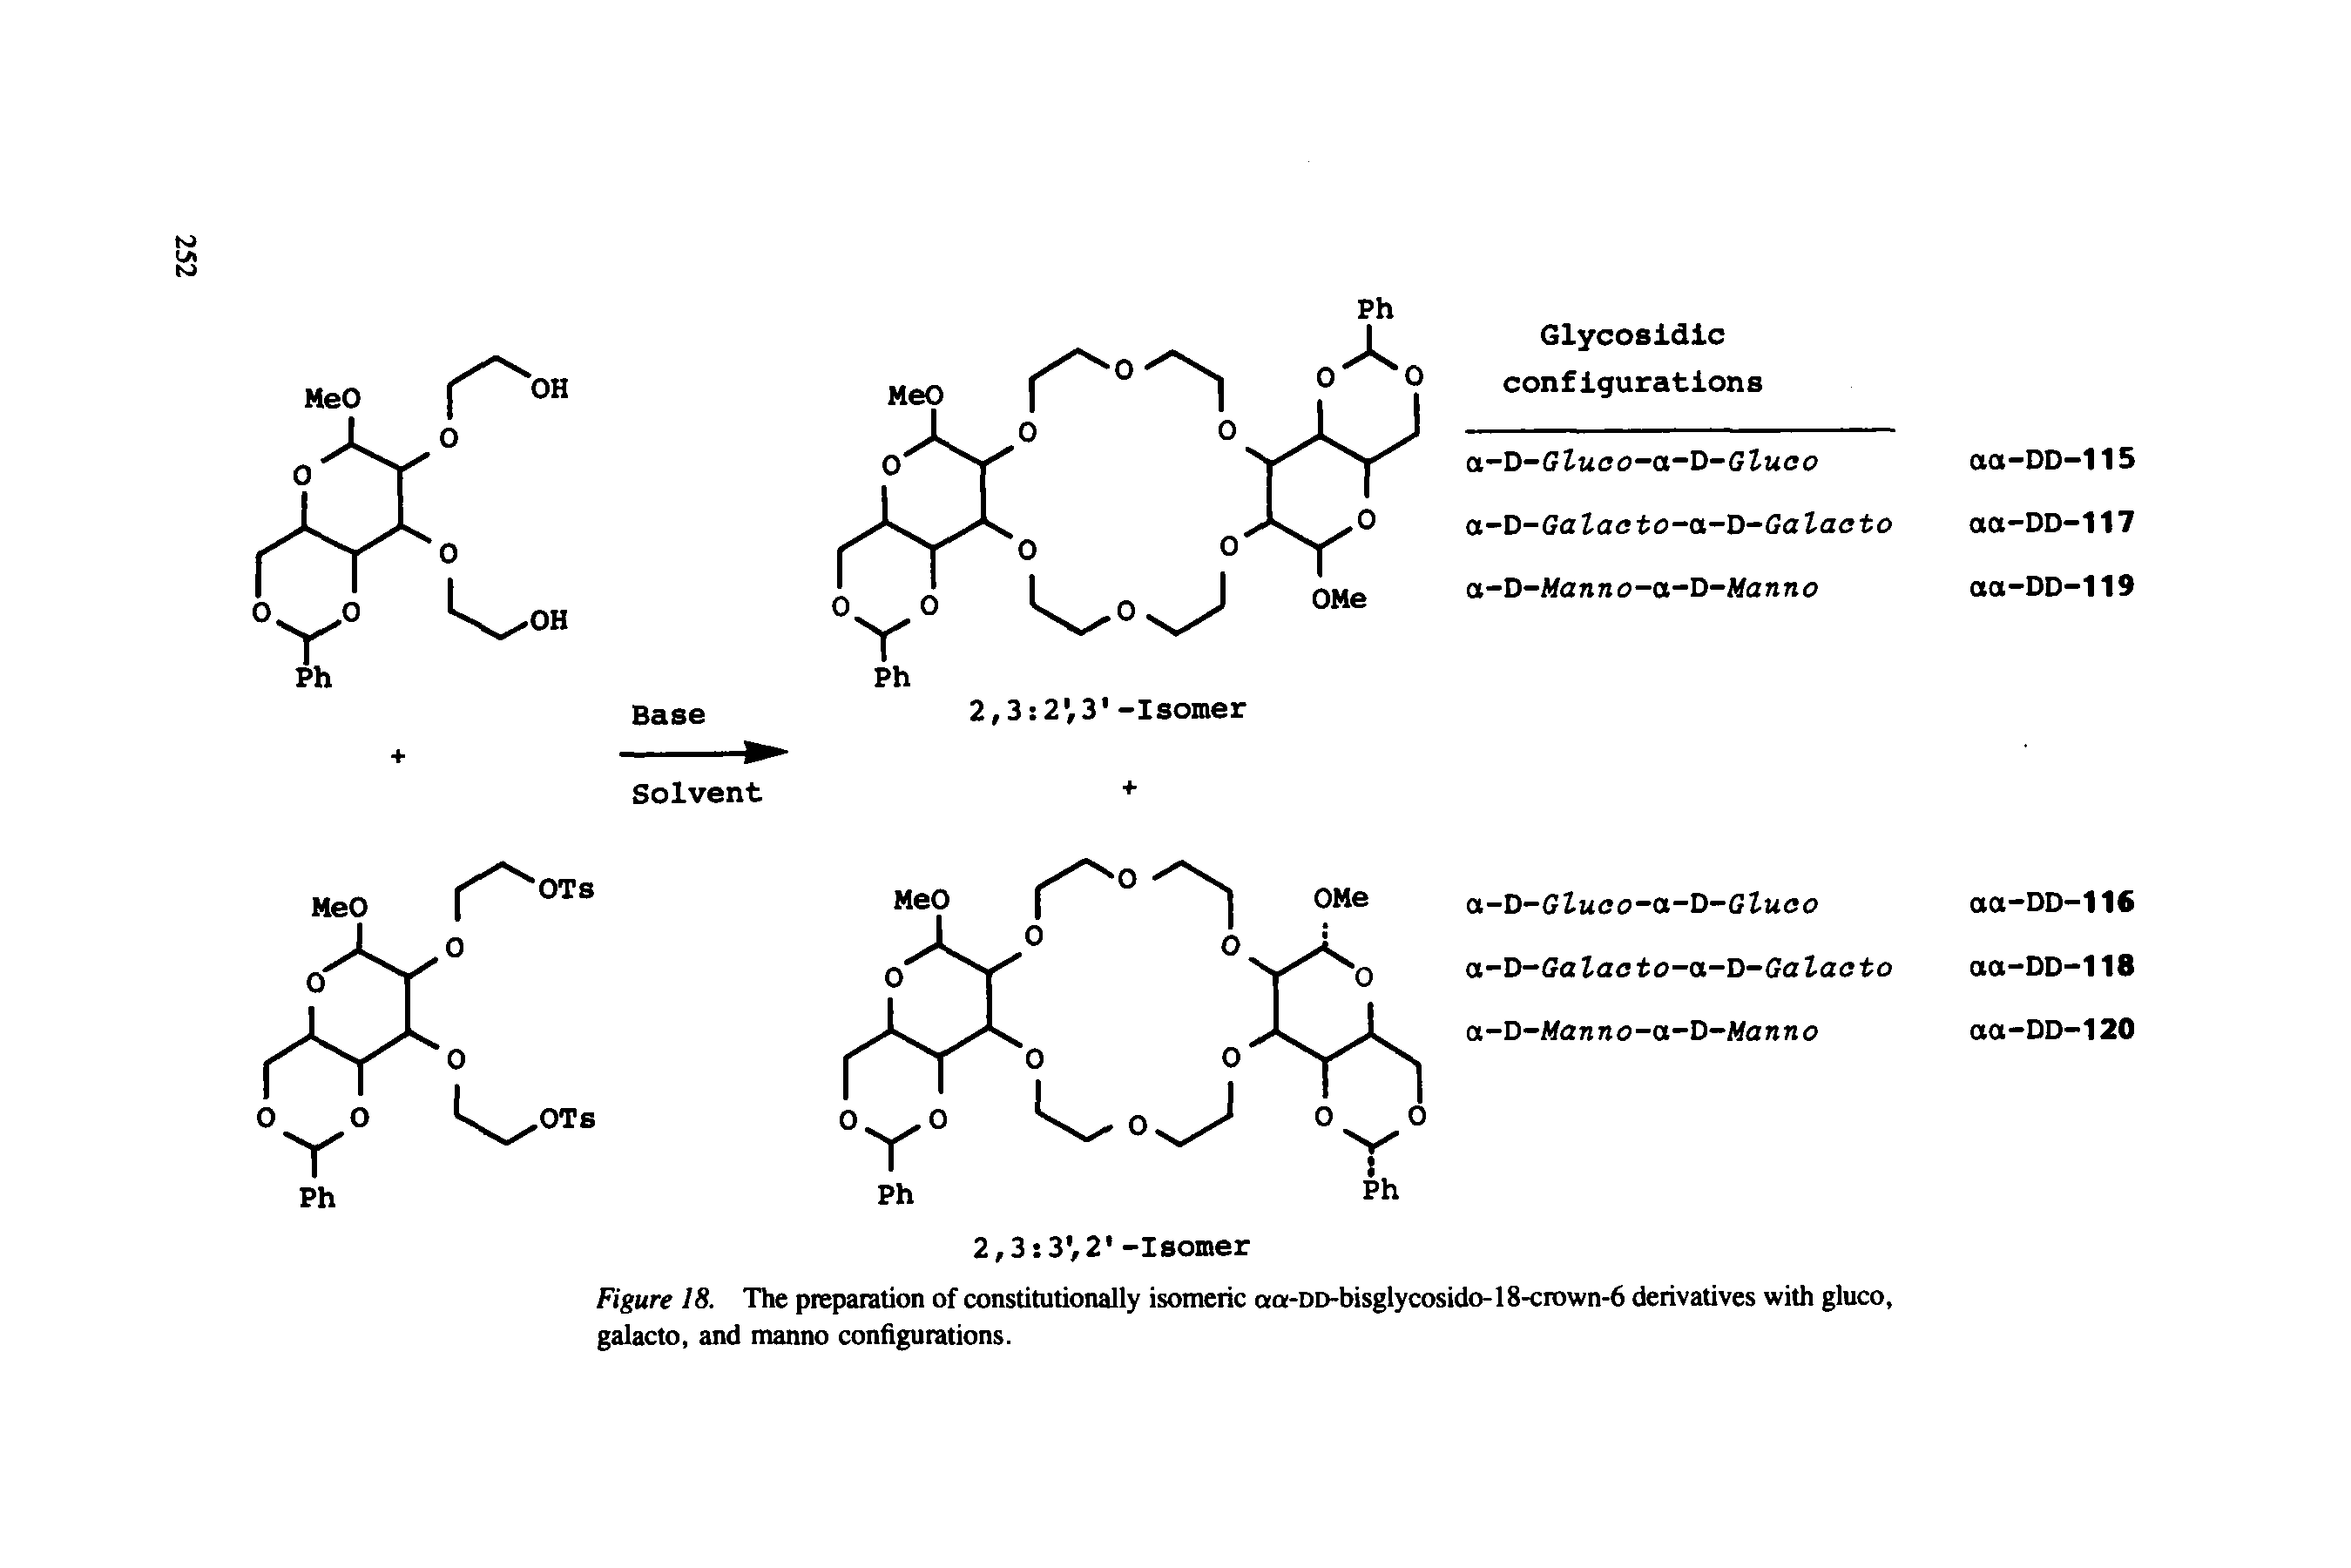 Figure 18. The preparation of constitutionally isomeric aa-DD-bisglycosido-18-crown-6 derivatives with gluco, galacto, and manno configurations.